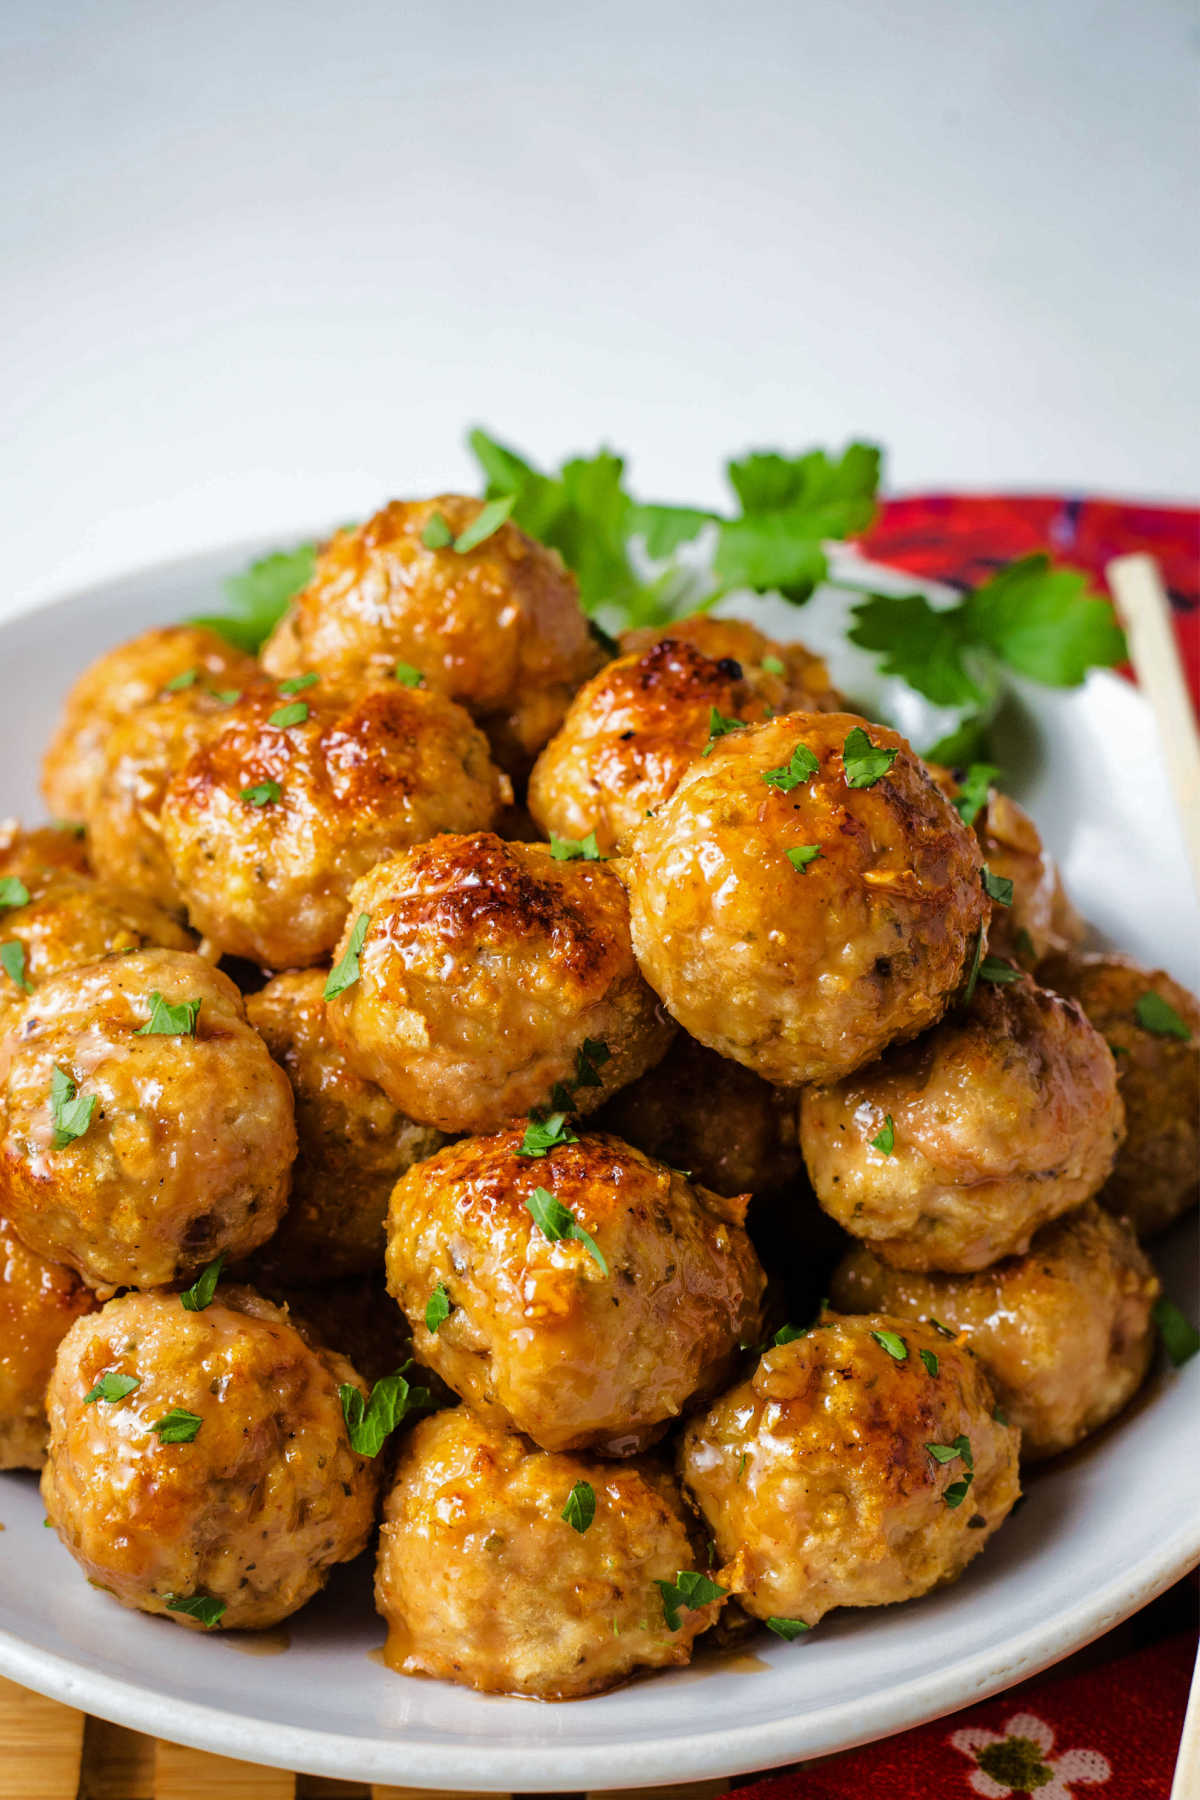 side view of a plate of chicken meatballs garnished with parsley on top of a red napkin on a table.